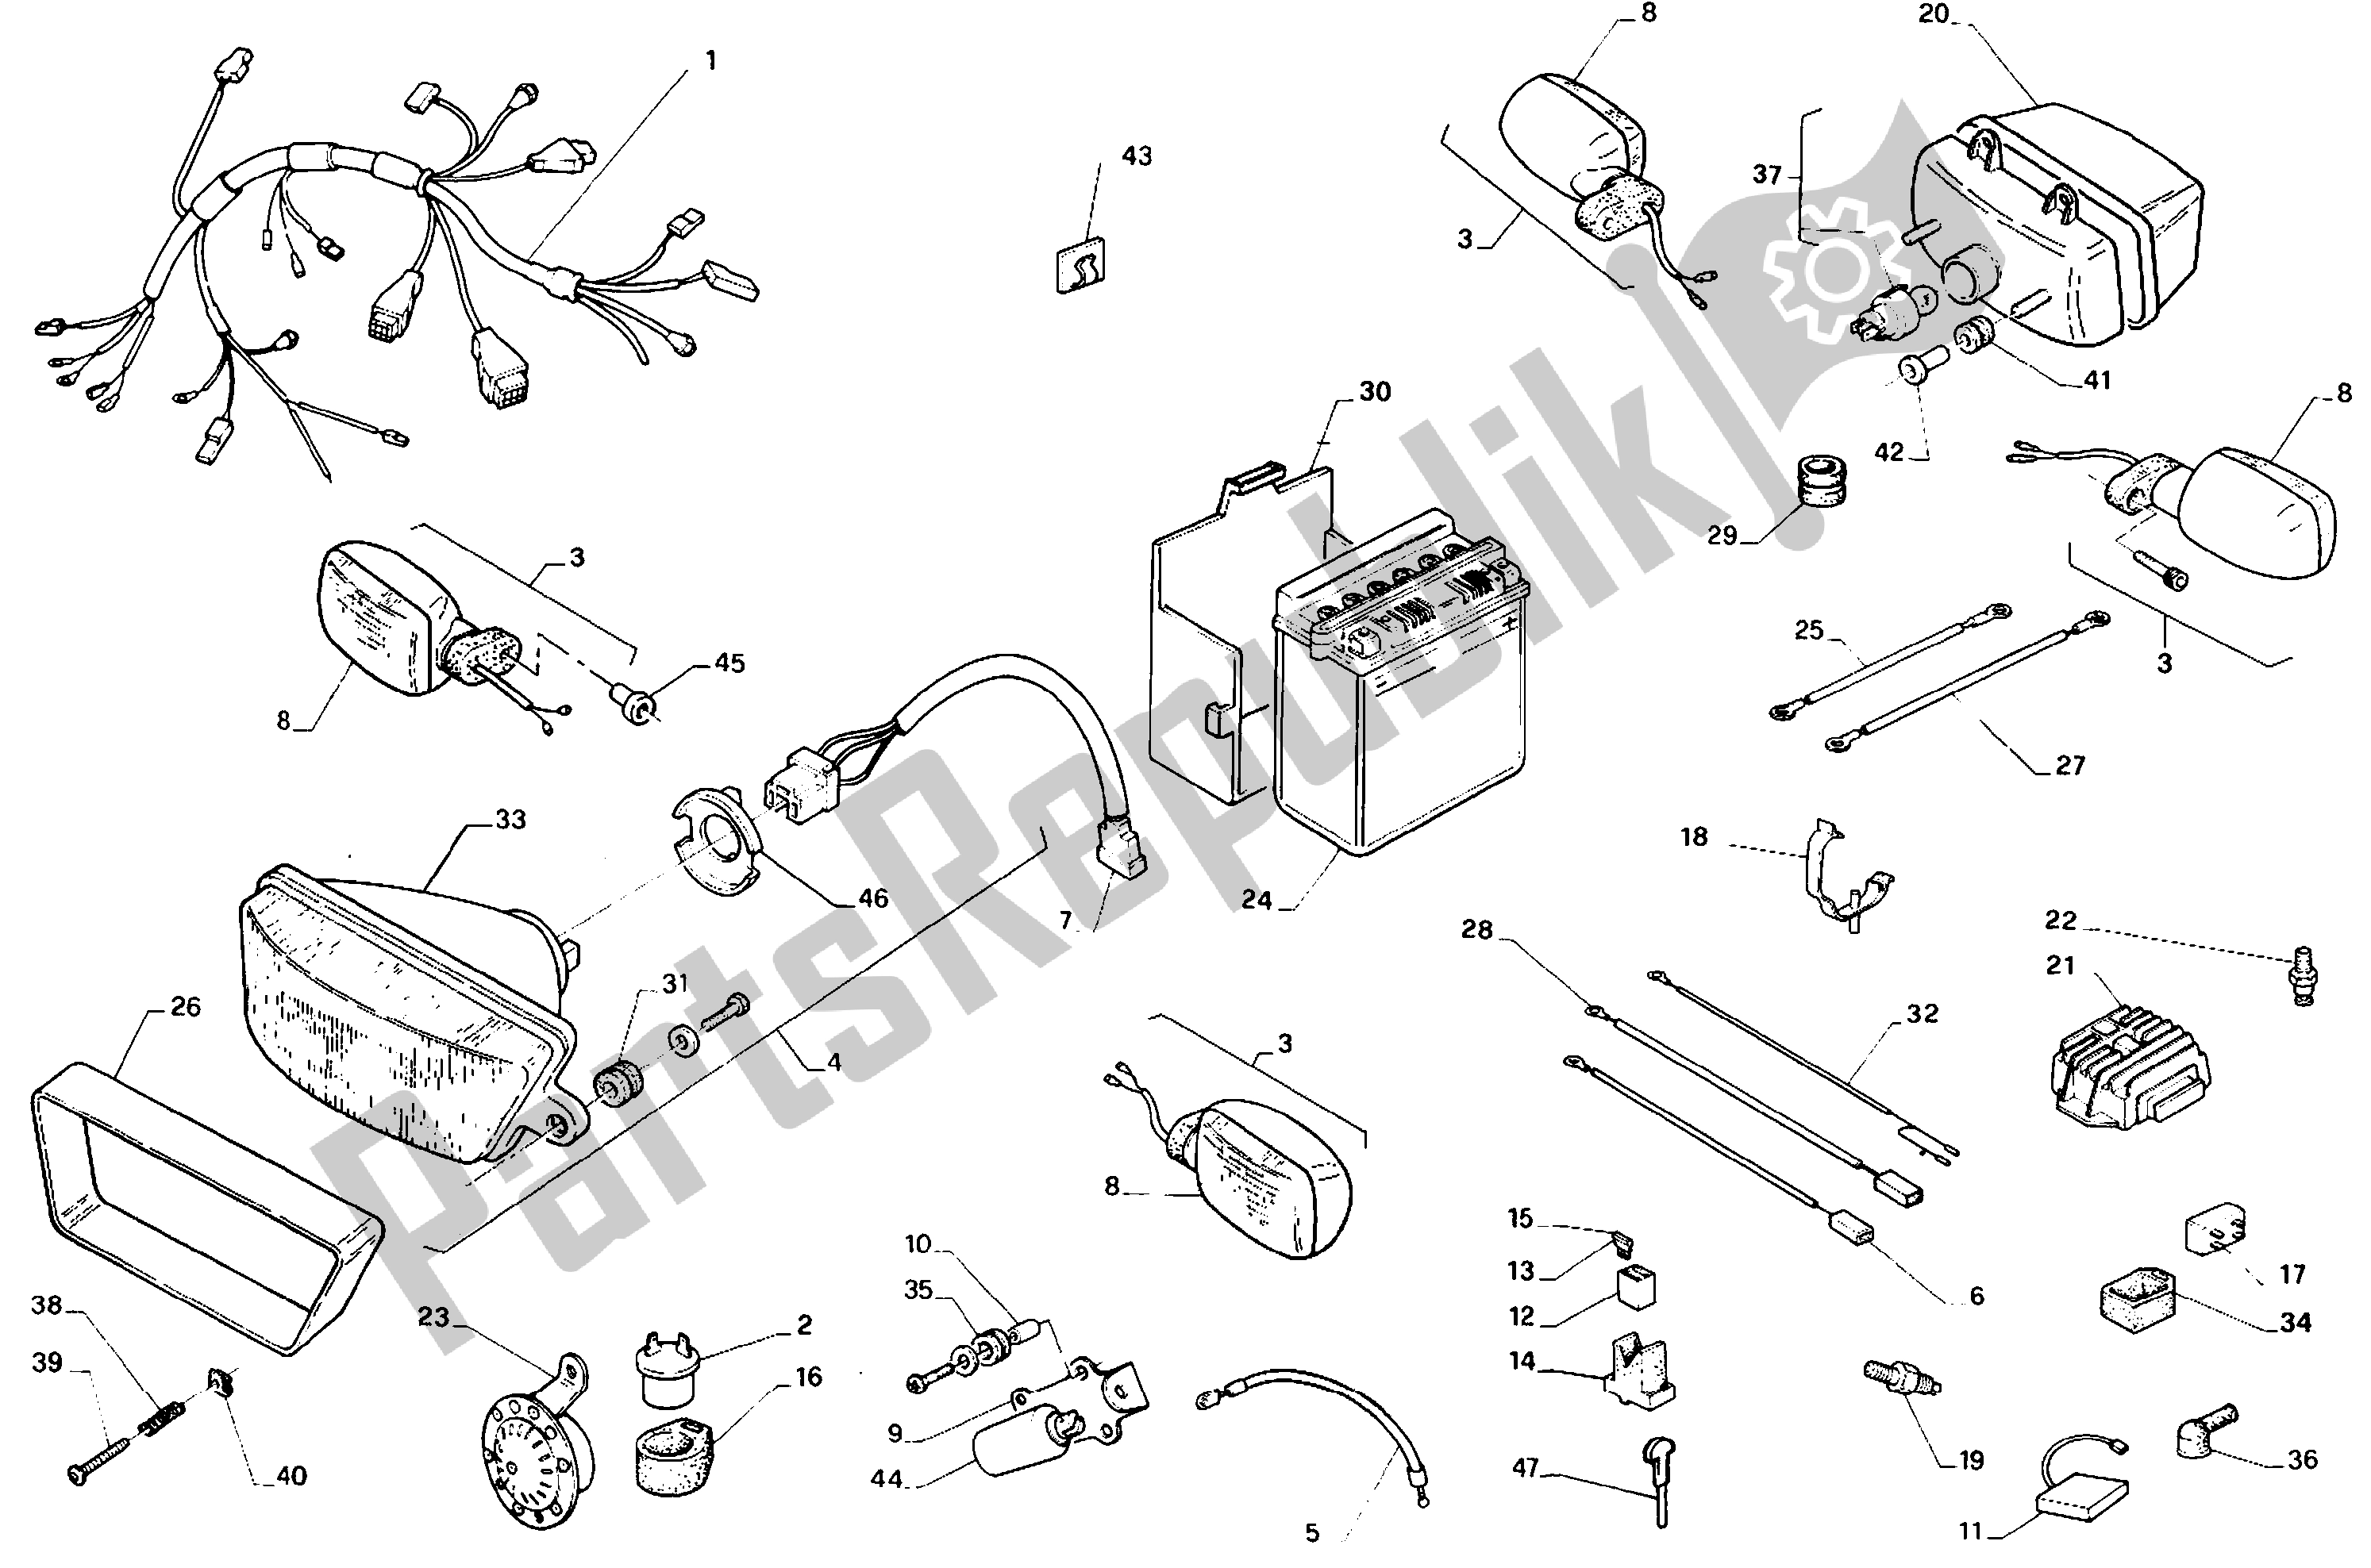 All parts for the Electrical System of the Aprilia AF1 125 1990 - 1992